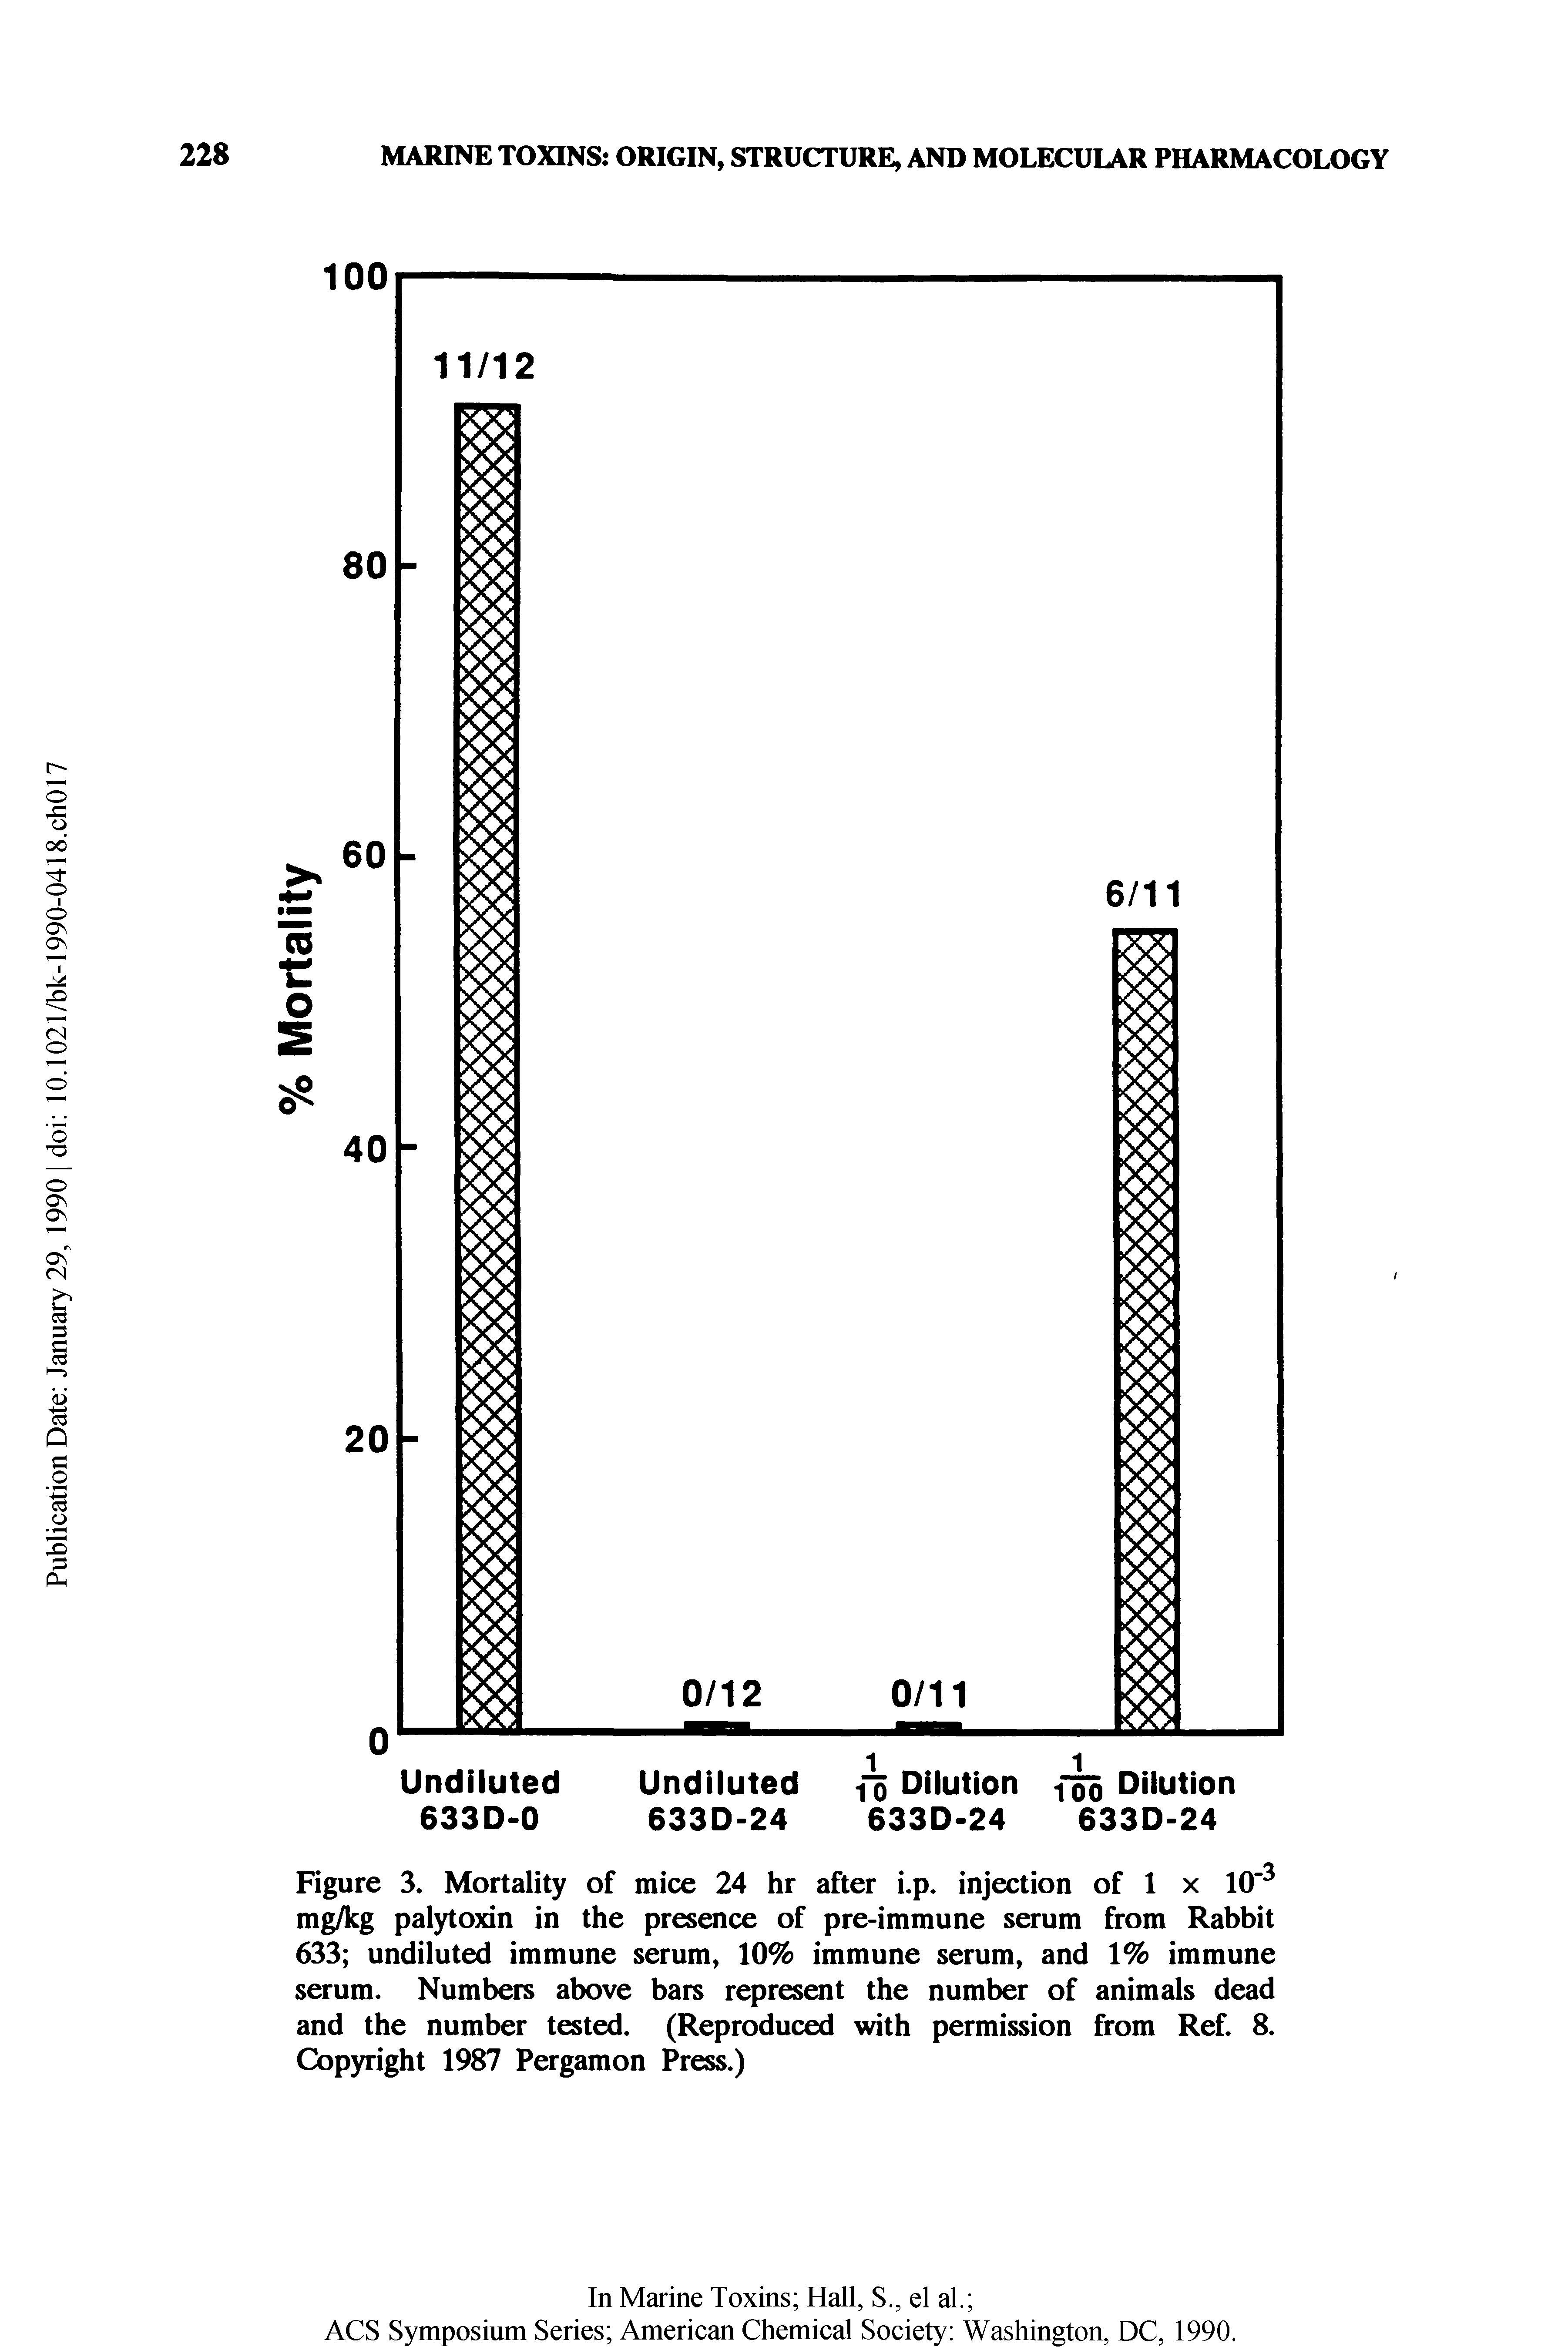 Figure 3. Mortality of mice 24 hr after i.p. injection of 1 x 10" mg/kg palytoxin in the presence of pre-immune serum from Rabbit 633 undiluted immune serum, 10% immune serum, and 1% immune serum. Numbers above bars represent the number of animals dead and the number tested. (Reproduced with permission from Ref. 8. Copyright 1987 Pergamon Press.)...